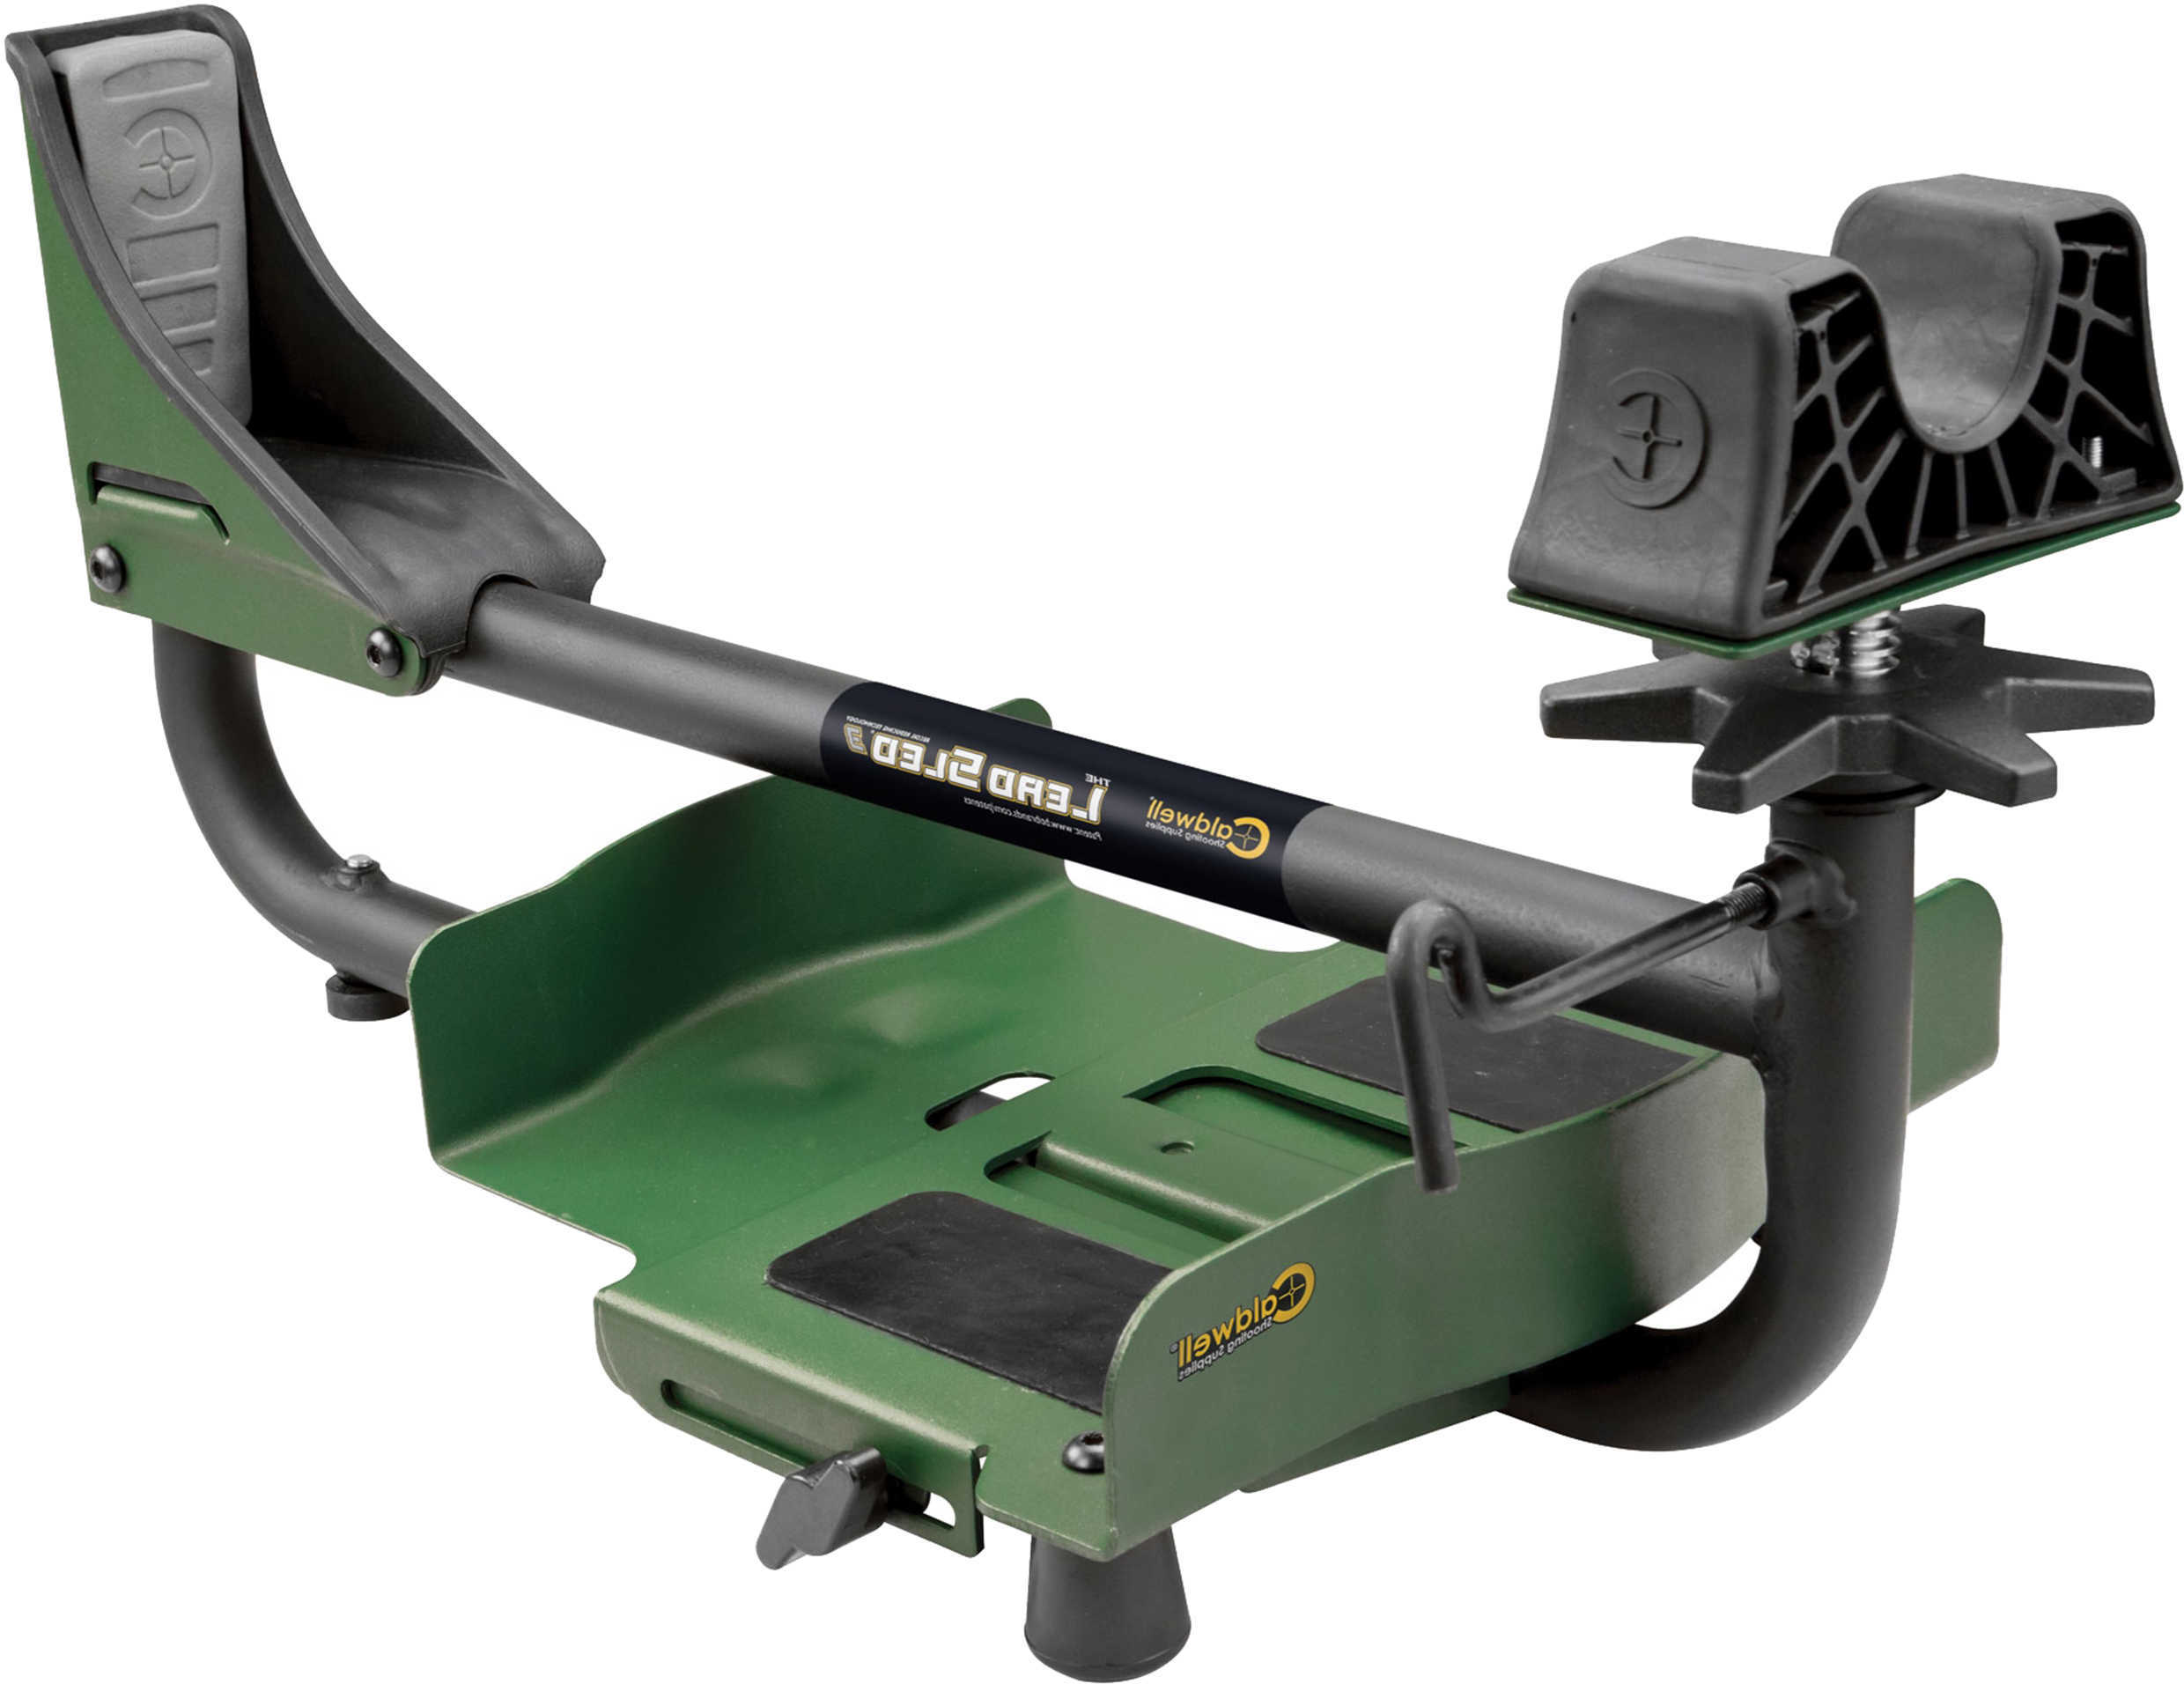 Caldwell Lead Sled-3 Rest (Recoil Reducing Technology)